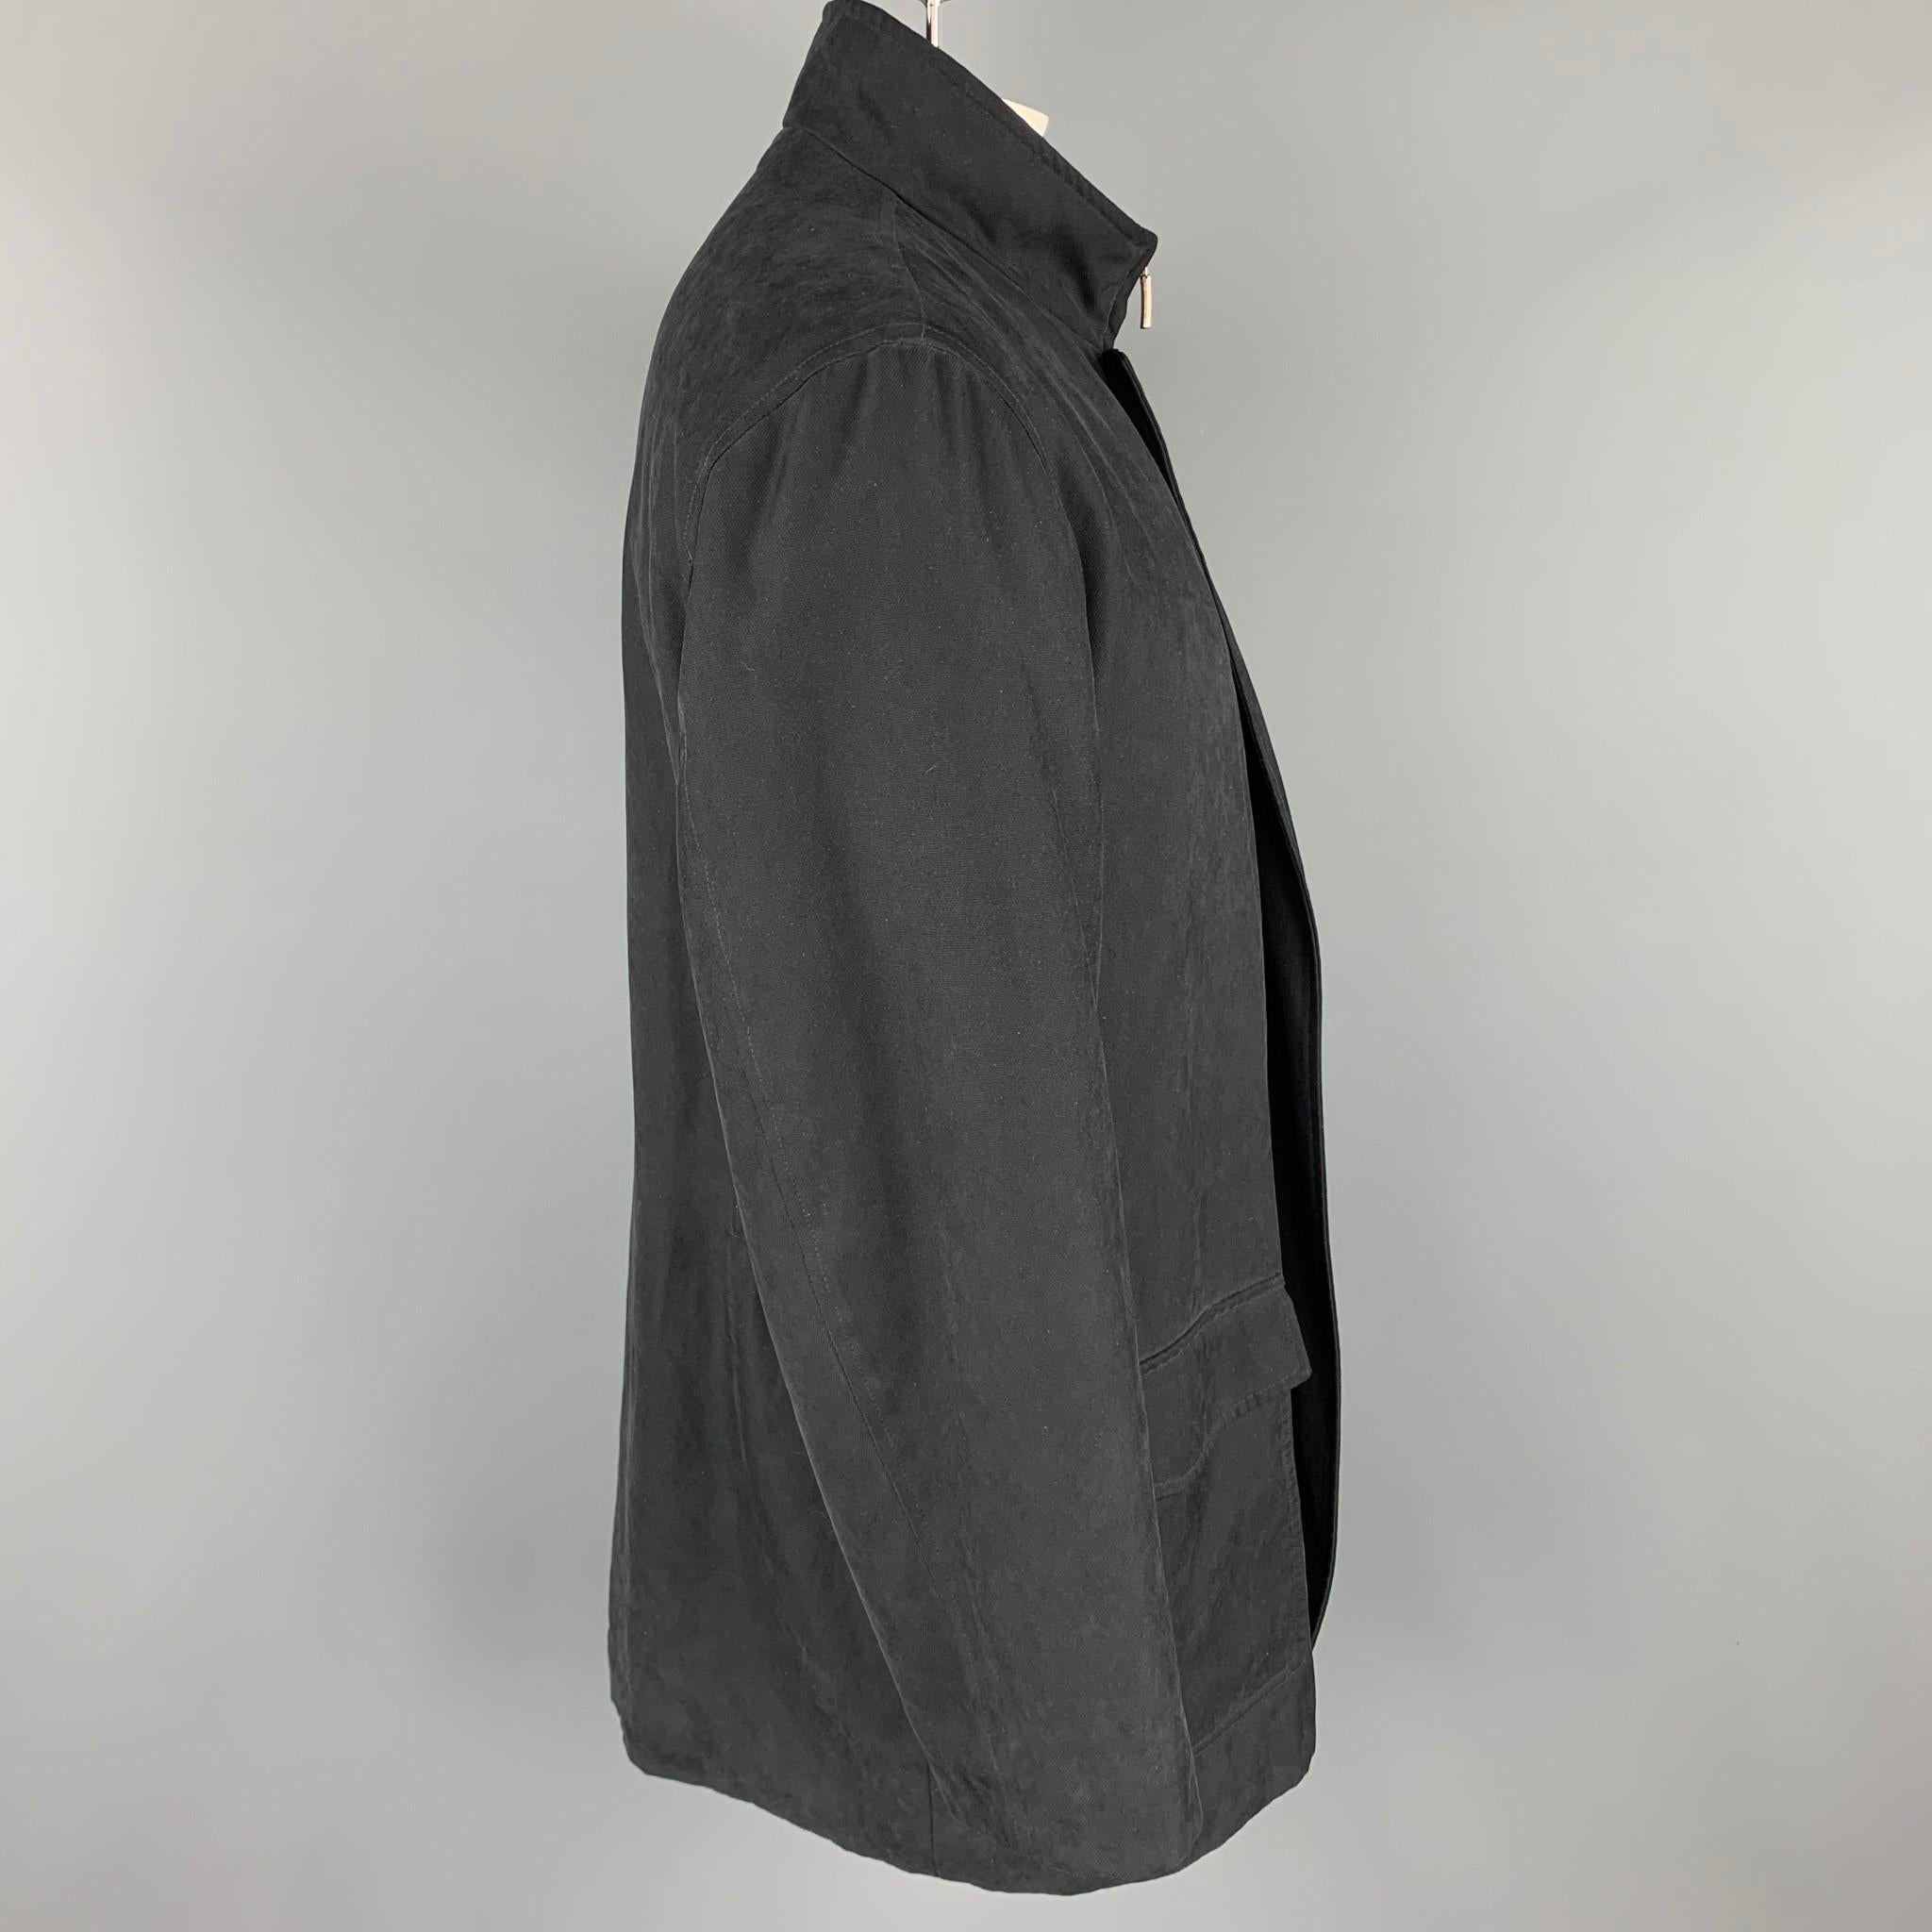 ERMENEGILDO ZEGNA coat comes in a black polyester blend with a quilted liner featuring flap pockets and a hidden zip up closure. Made in Italy. 

Very Good Pre-Owned Condition.
Marked: L/52

Measurements:

Shoulder: 21 in.
Chest: 48 in.
Sleeve: 26